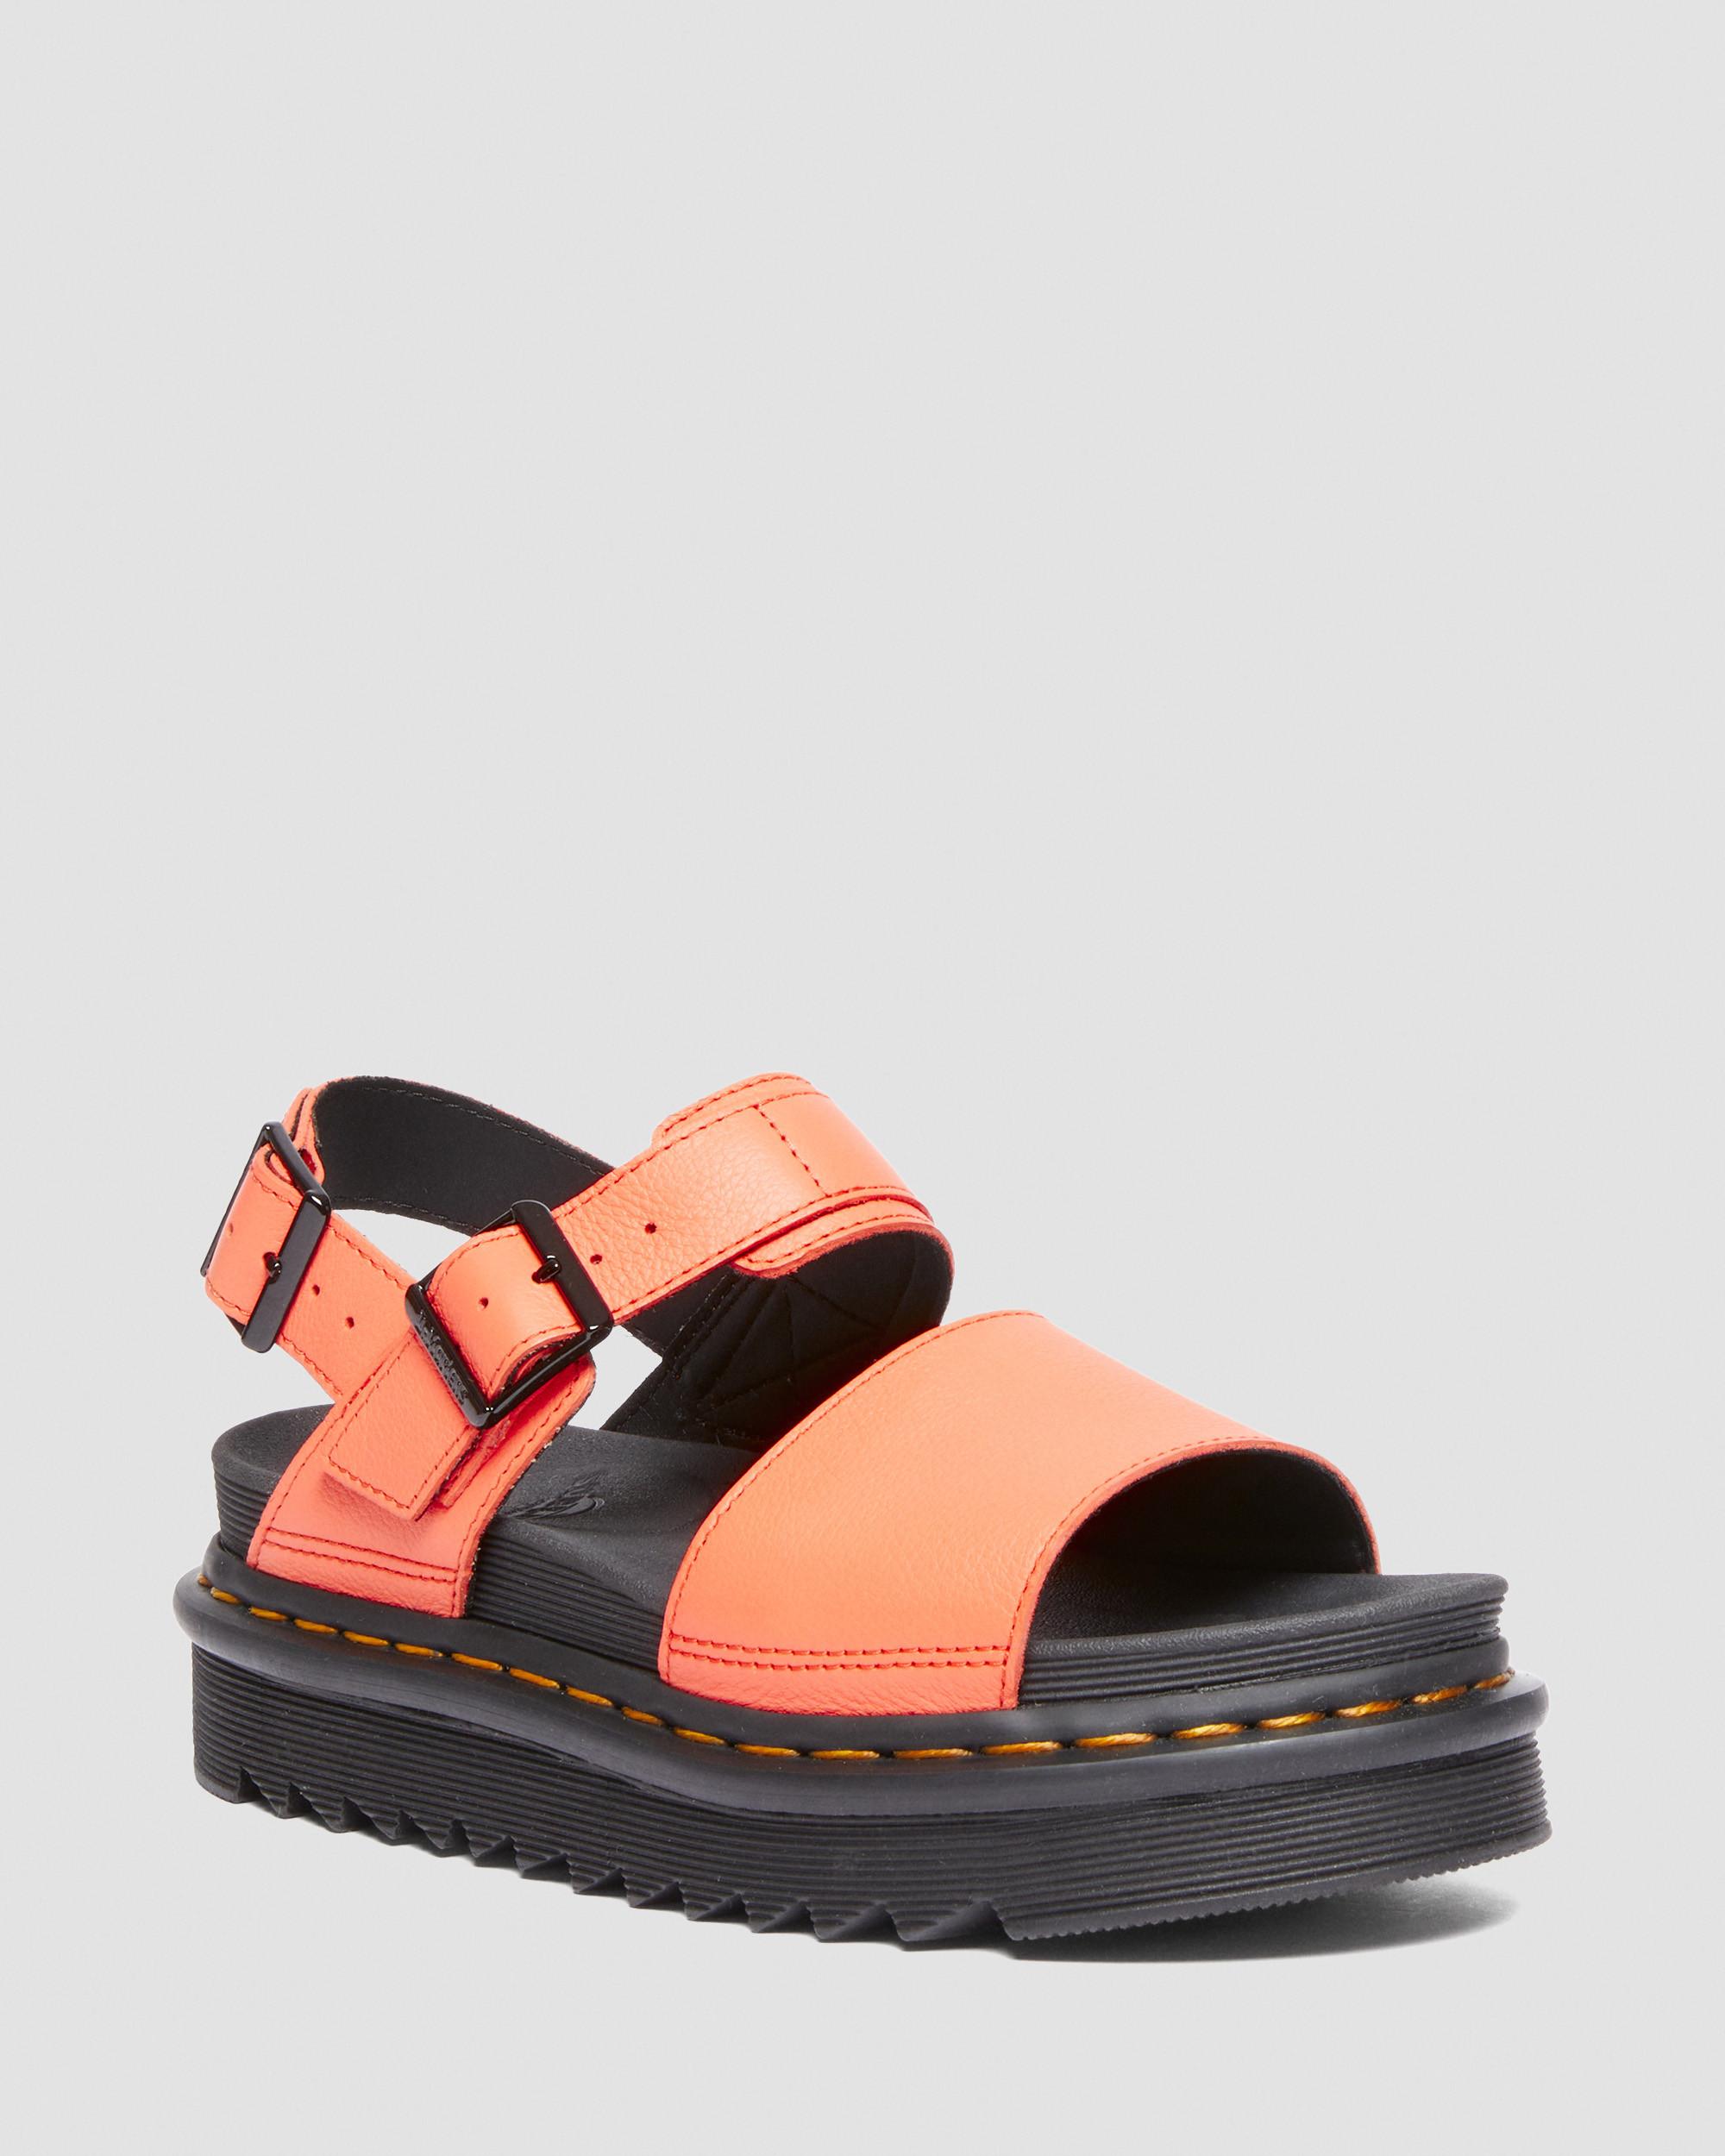 Voss Pisa Leather Strap Sandals in Coral | Dr. Martens